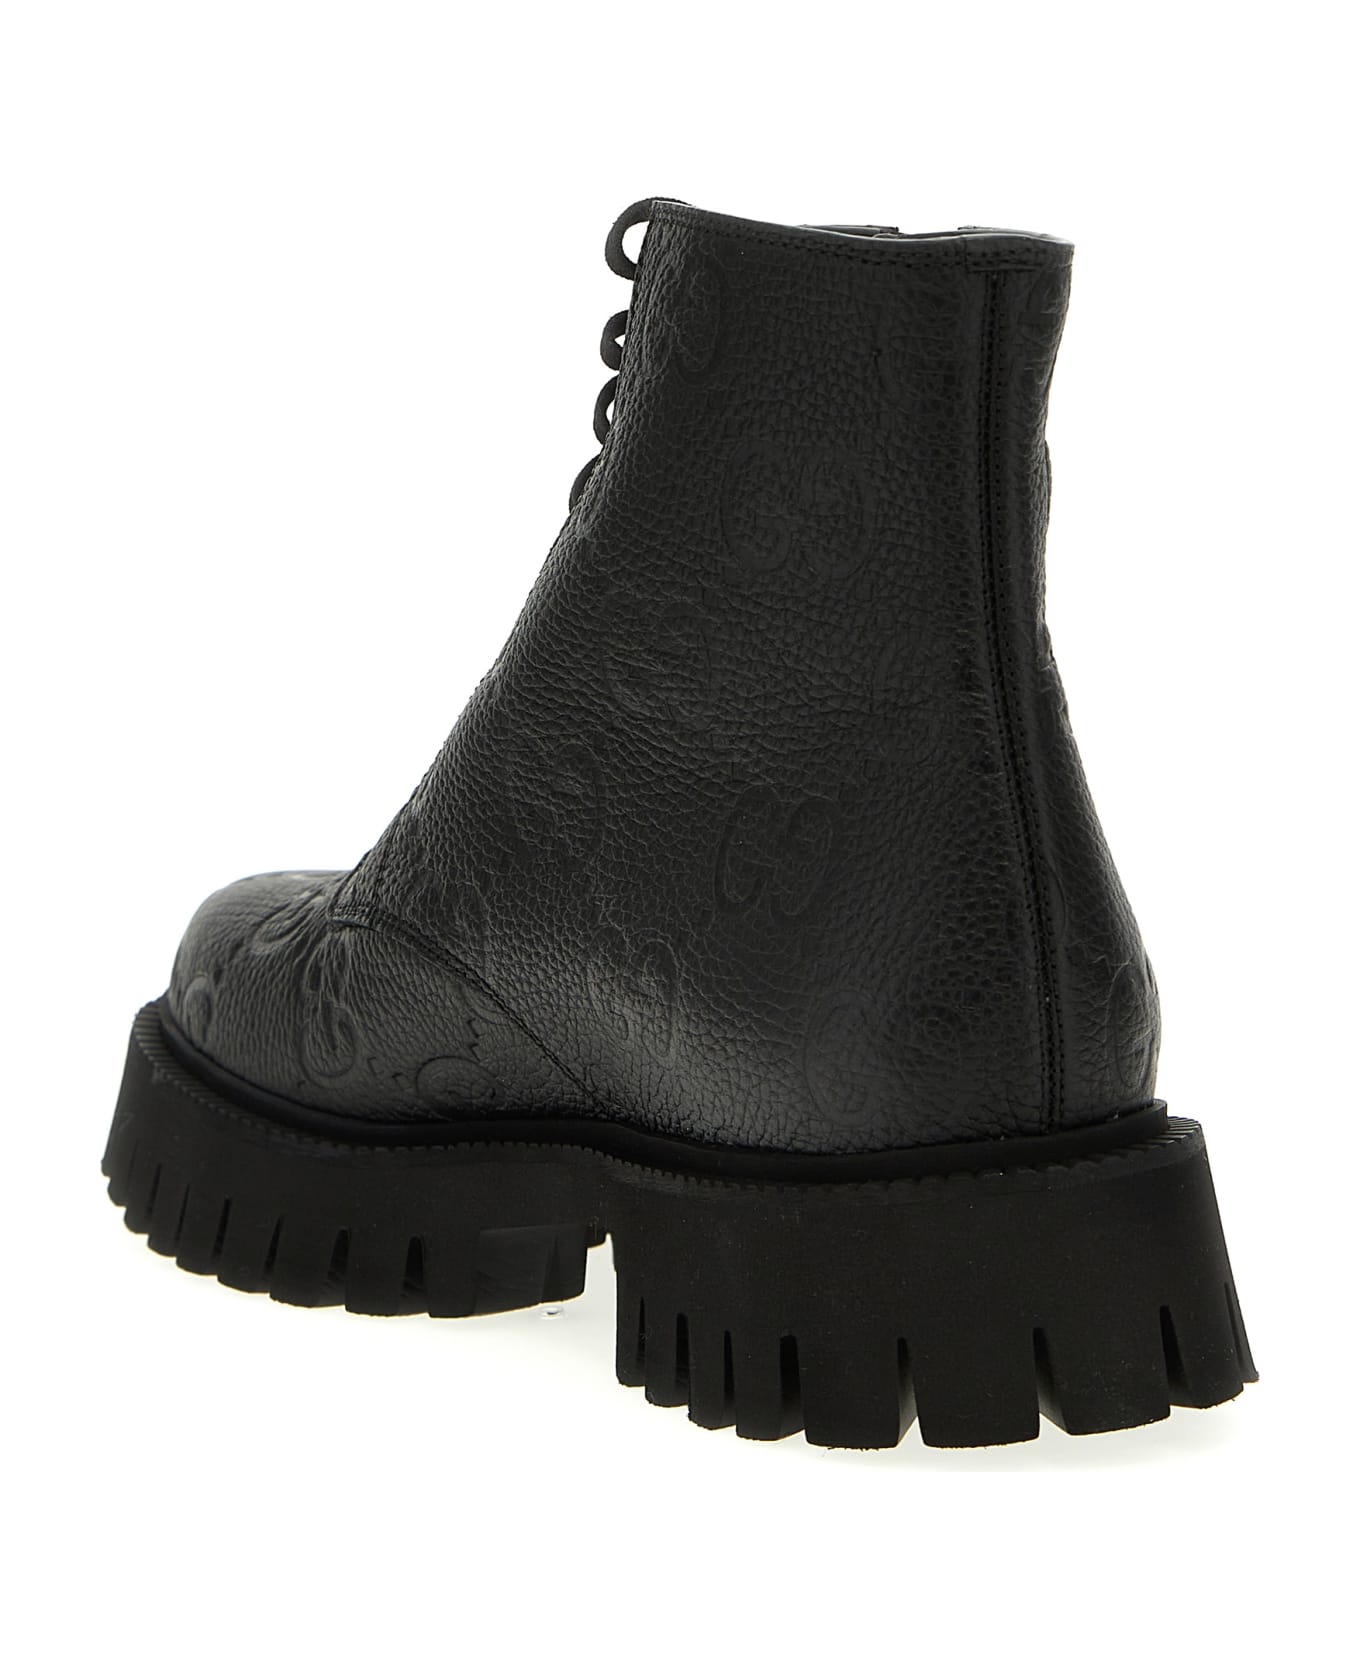 Gucci 'gg' Ankle Boots - Black